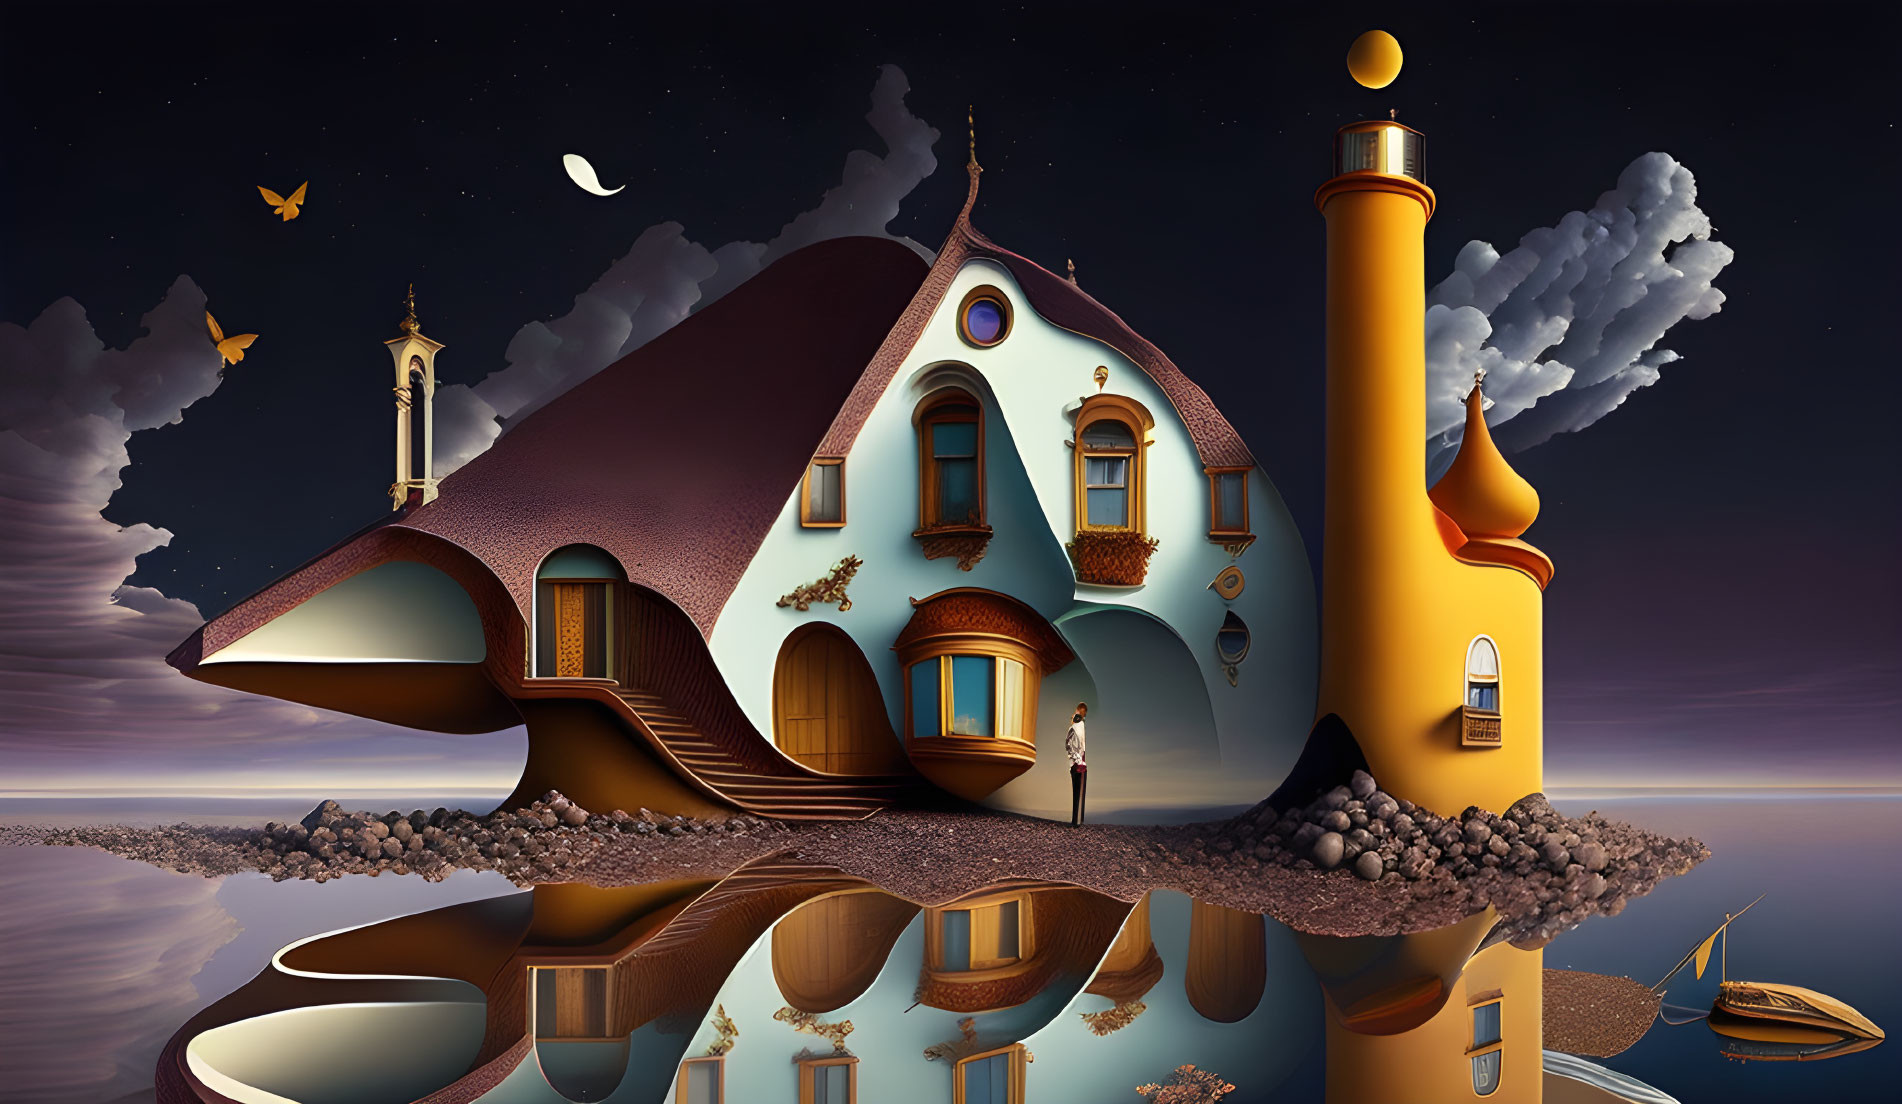 Surreal fantasy landscape with elongated house, yellow chimney, and twilight reflection.